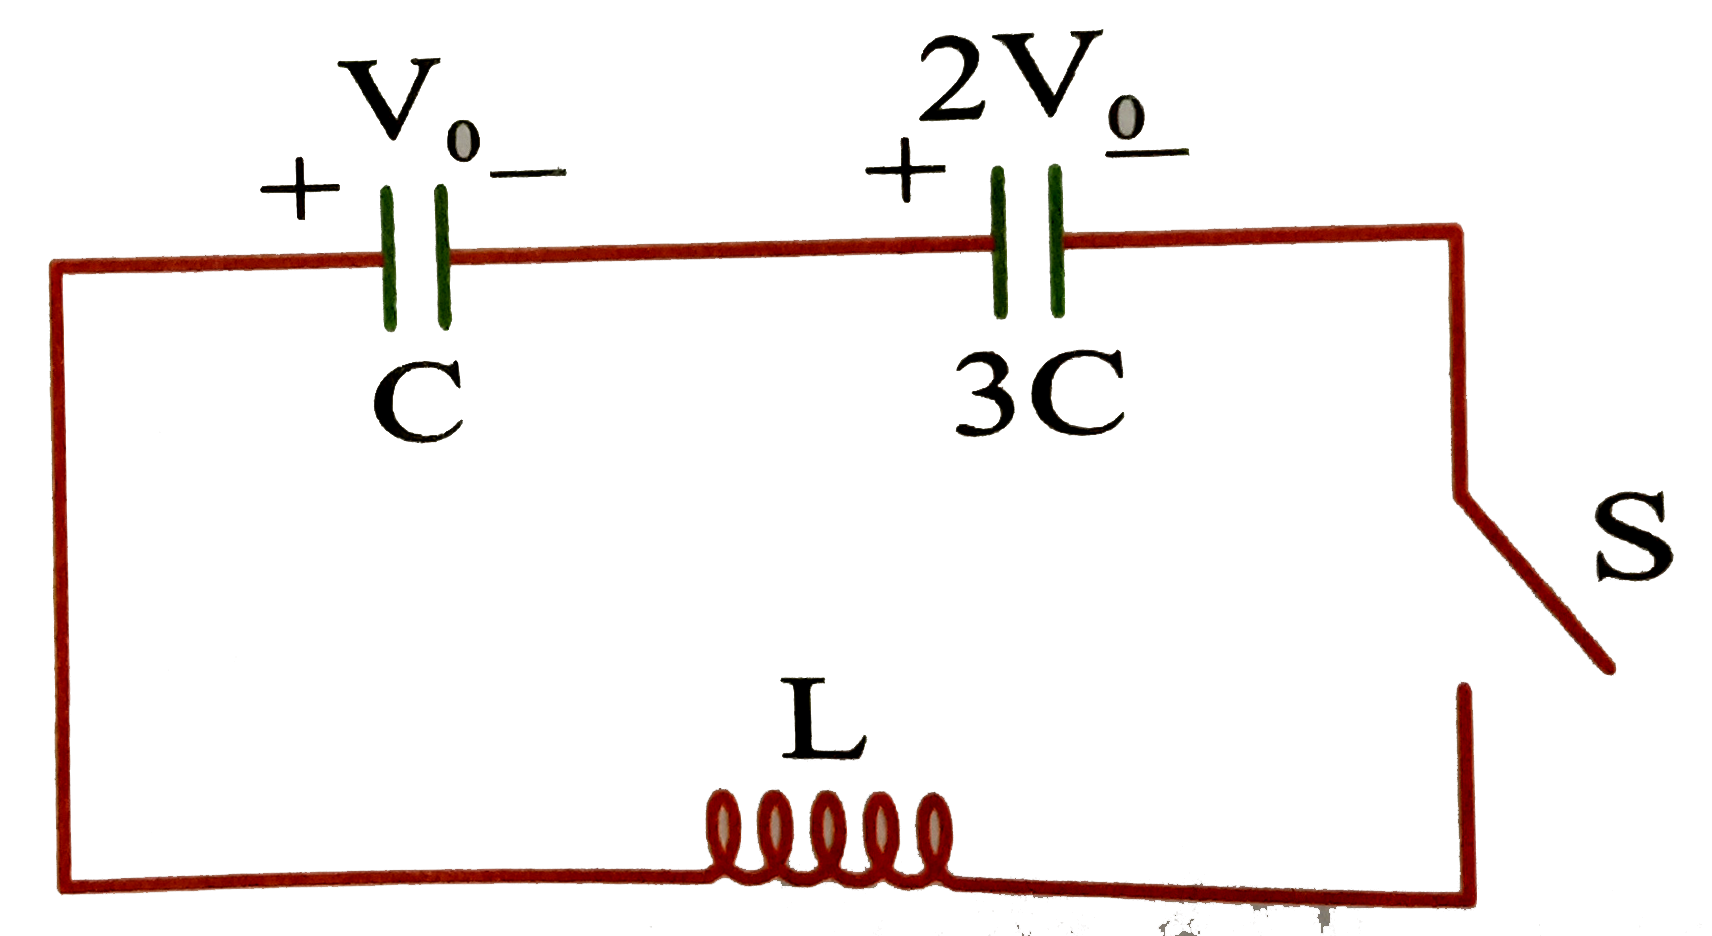 Two capacitors of capacitance C and 3C are charged to potential difference V(0) and 2V(0) respectively, and connected to an inductor of inductance L as shown in figure. Initially the current in the inductor is zero. Now, the switch S is closed.      Potential difference across capacitor of capacitance 3C when the current in the cirucit is maximum is :